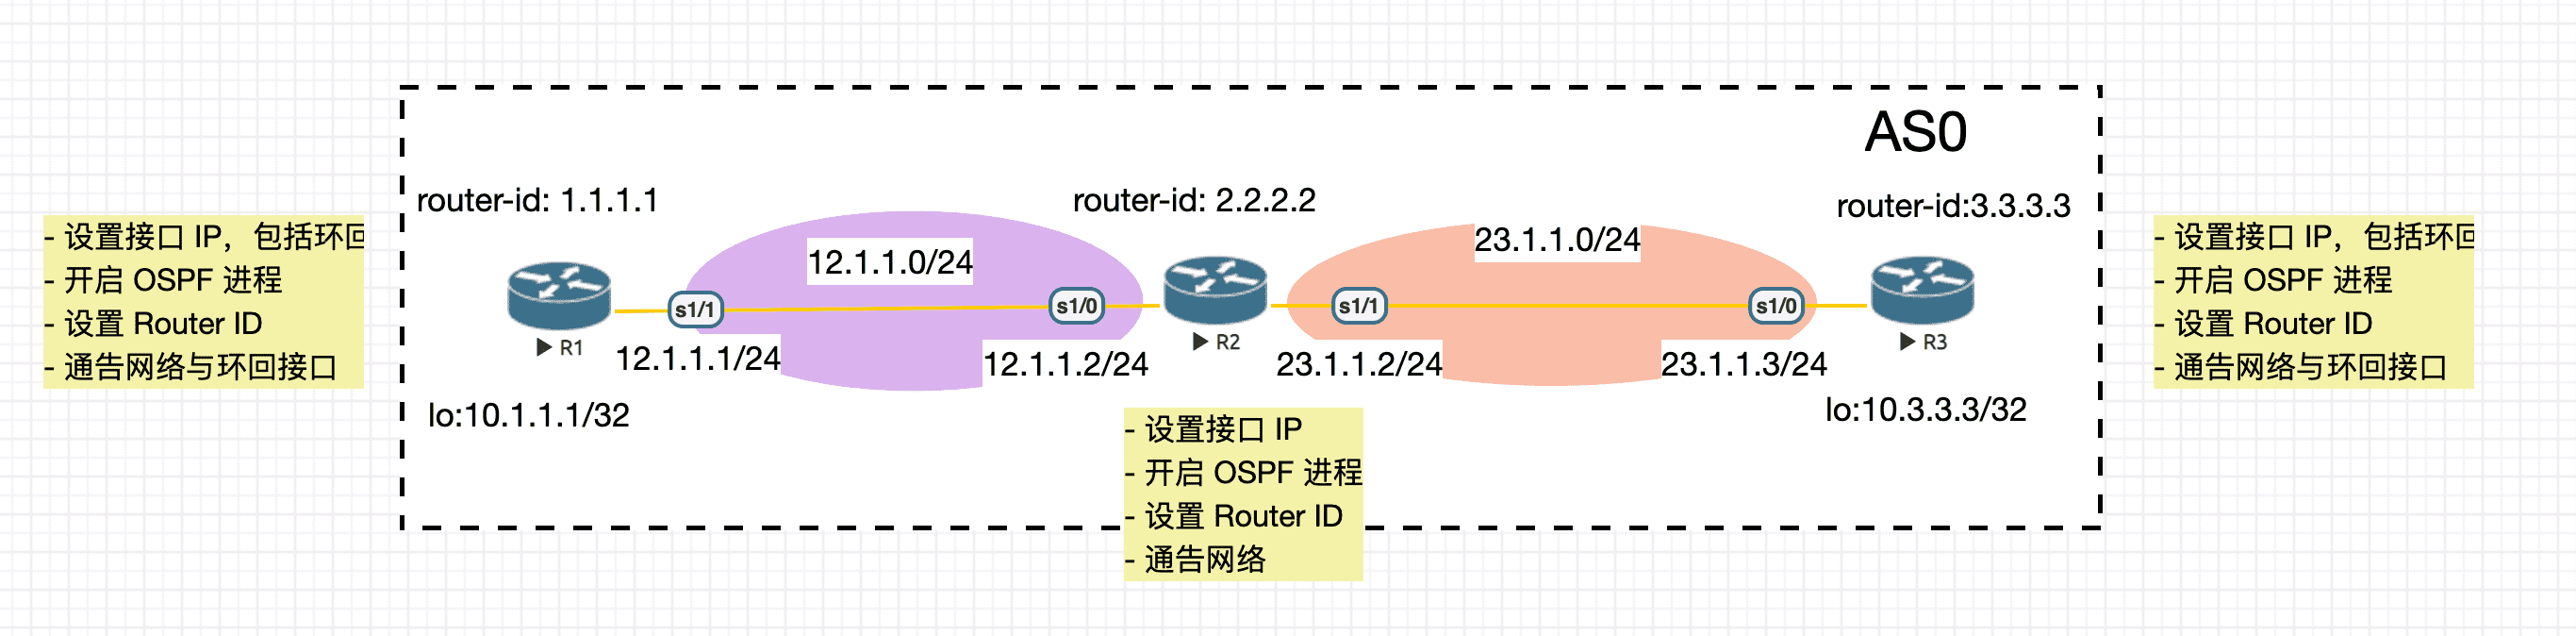 ospf_config.png